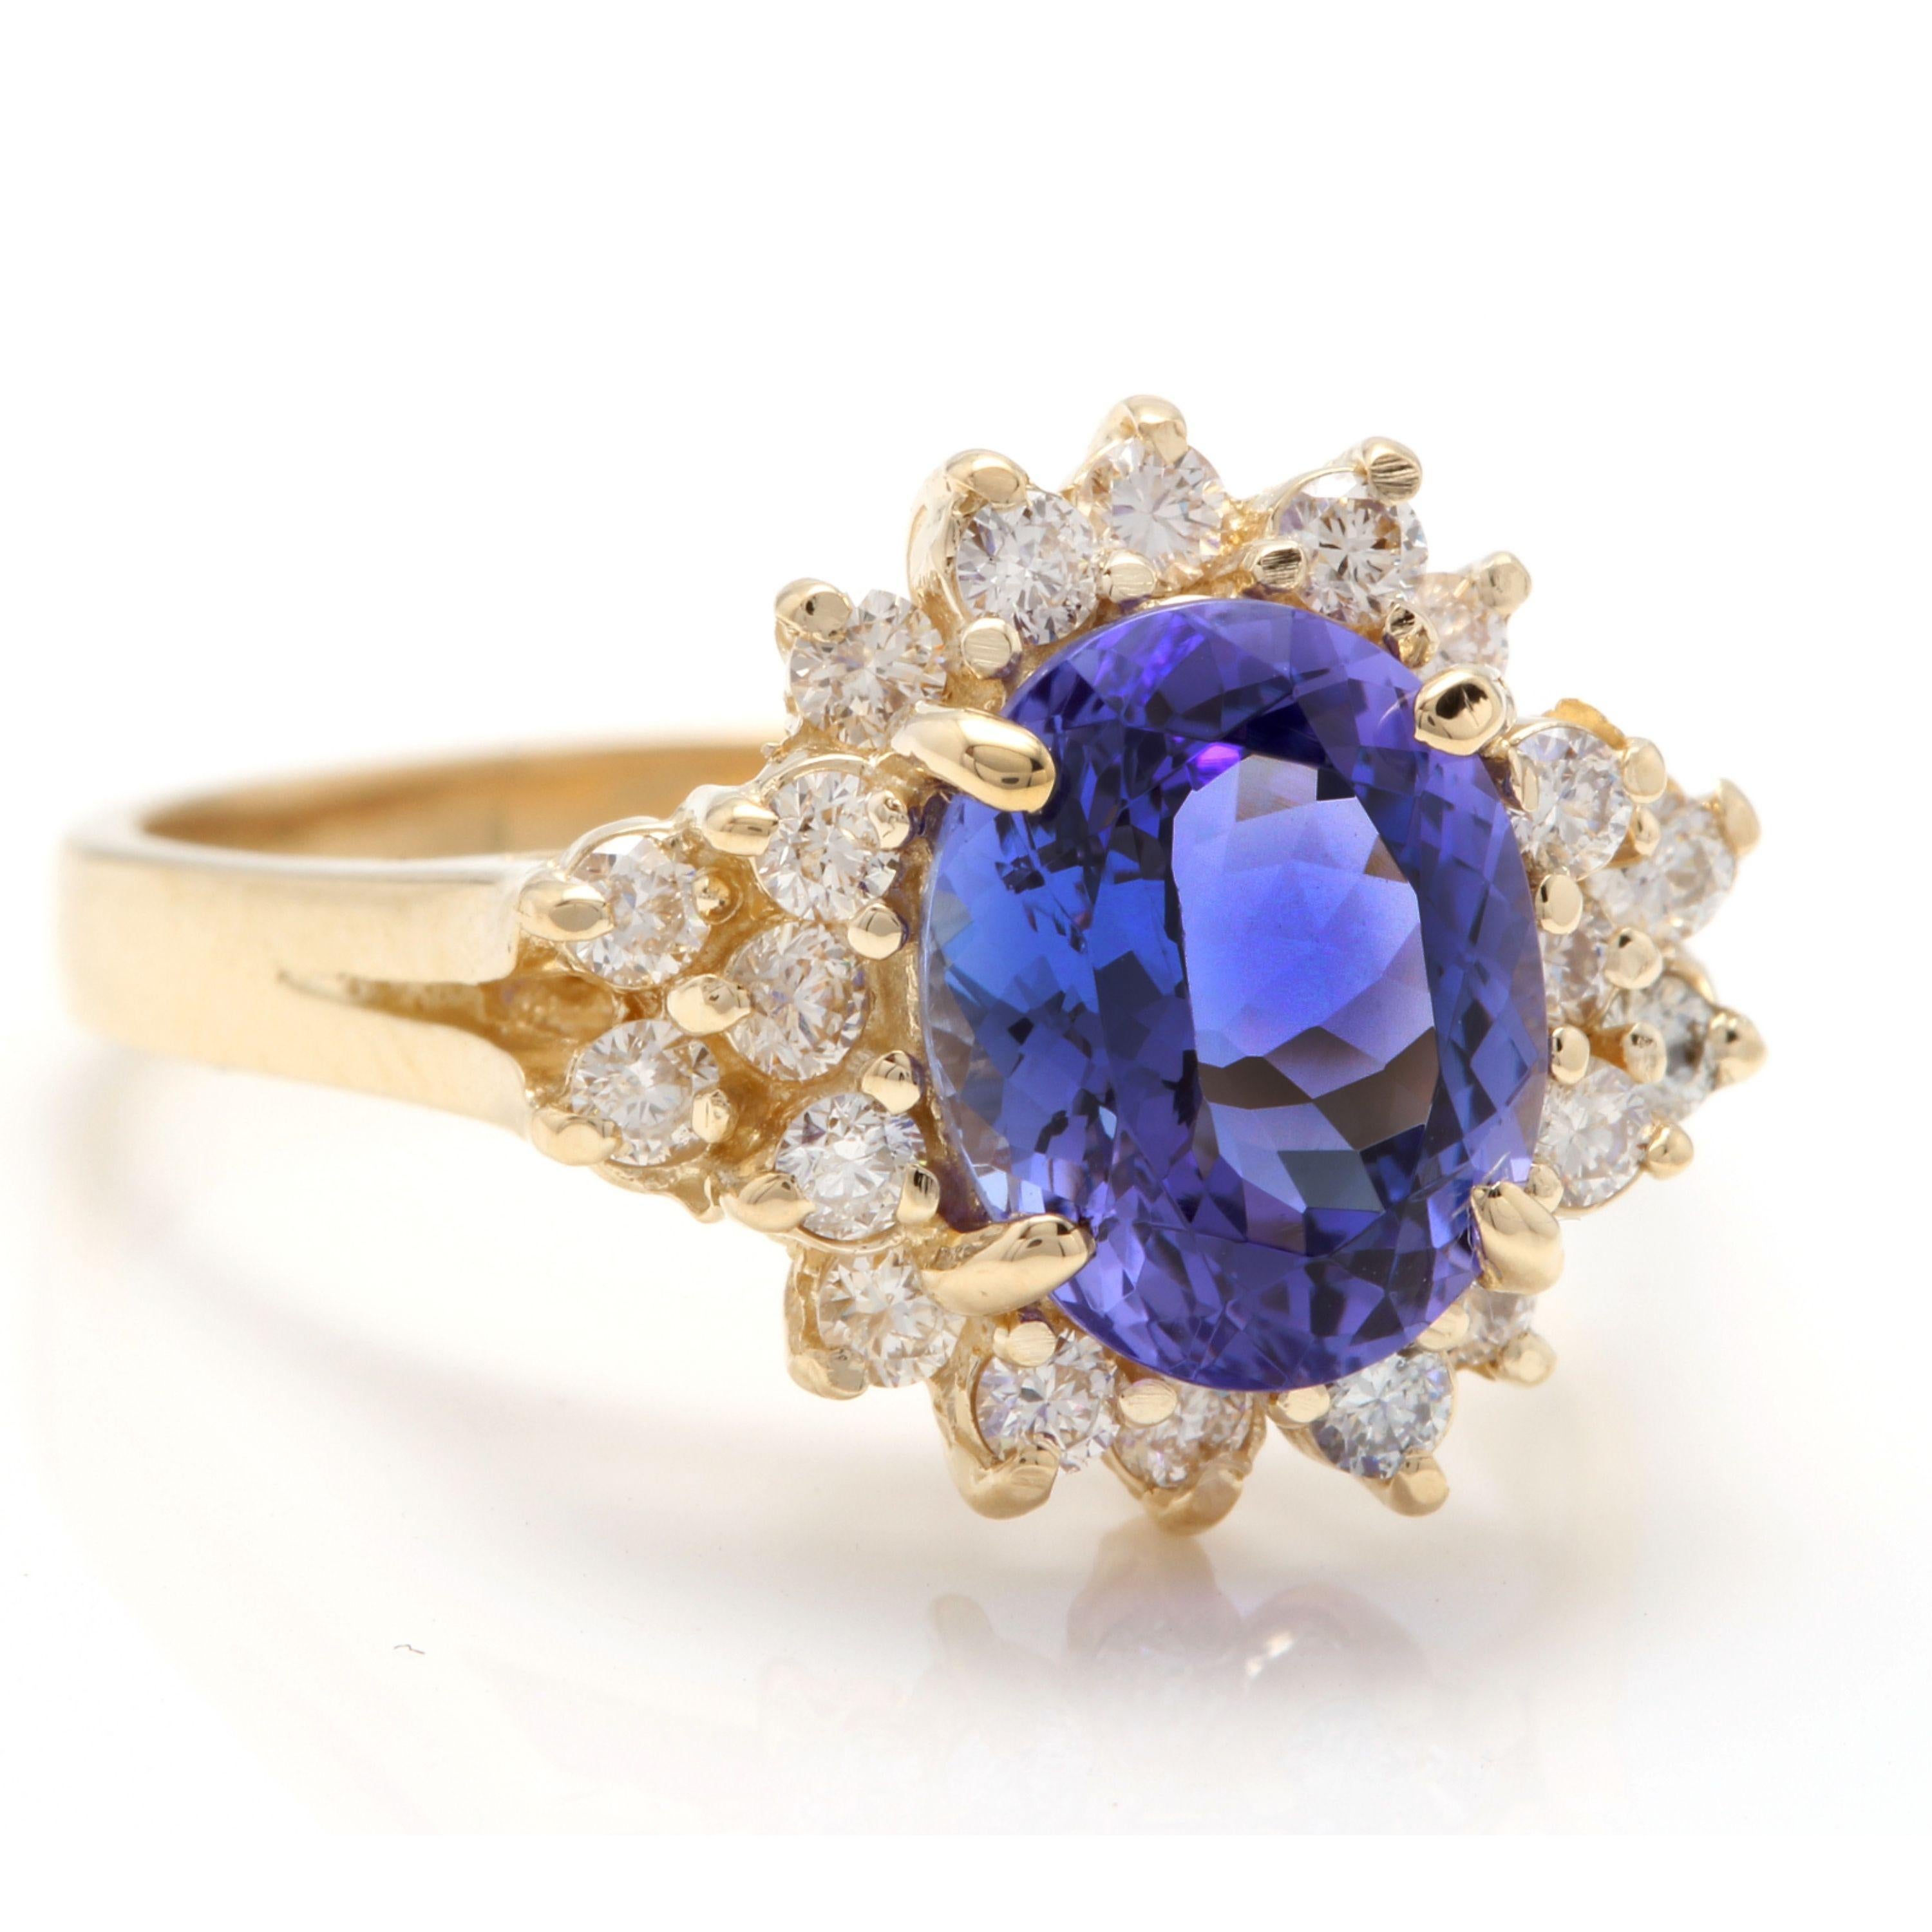 3.90 Carats Natural Very Nice Looking Tanzanite and Diamond 14K Solid Yellow Gold Ring

Total Natural Oval Shaped Tanzanite Weight is: Approx. 3.00 Carats

Aquamarine Measures: Approx. 10.0 x 8.00mm

Natural Round Diamonds Weight: Approx. 0.90 Carat